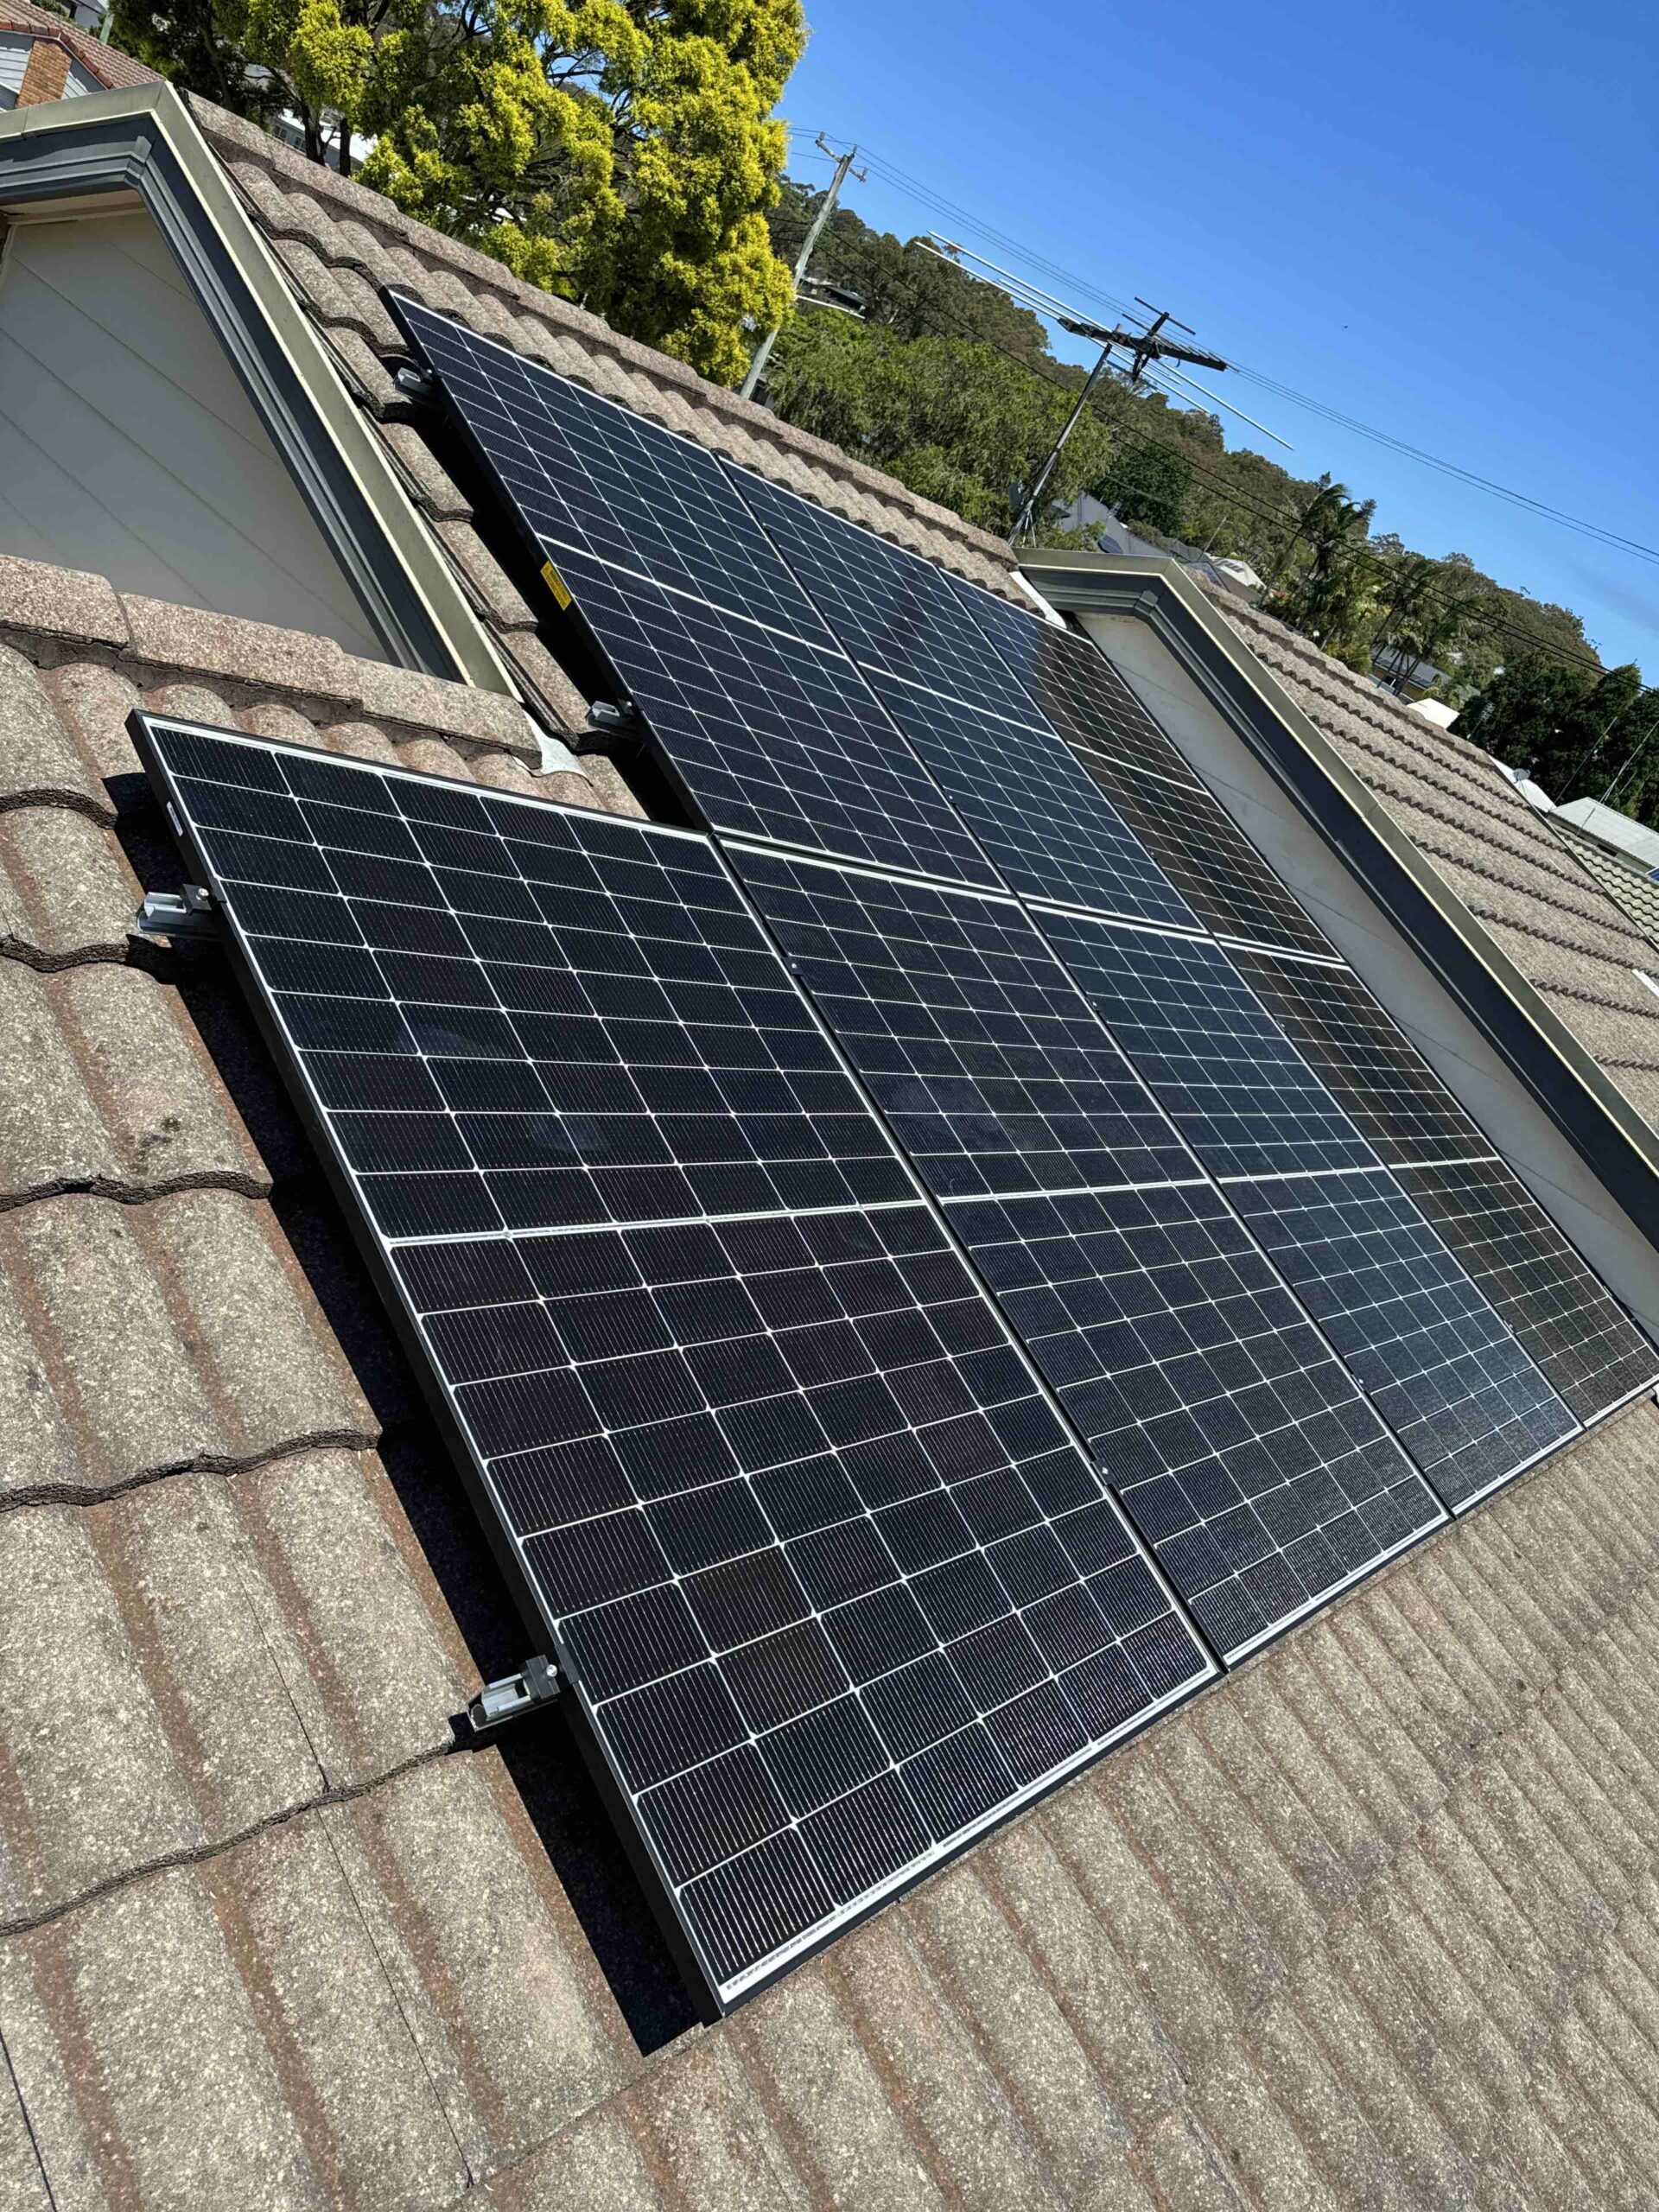 6.6kW System at Warners Bay NSW